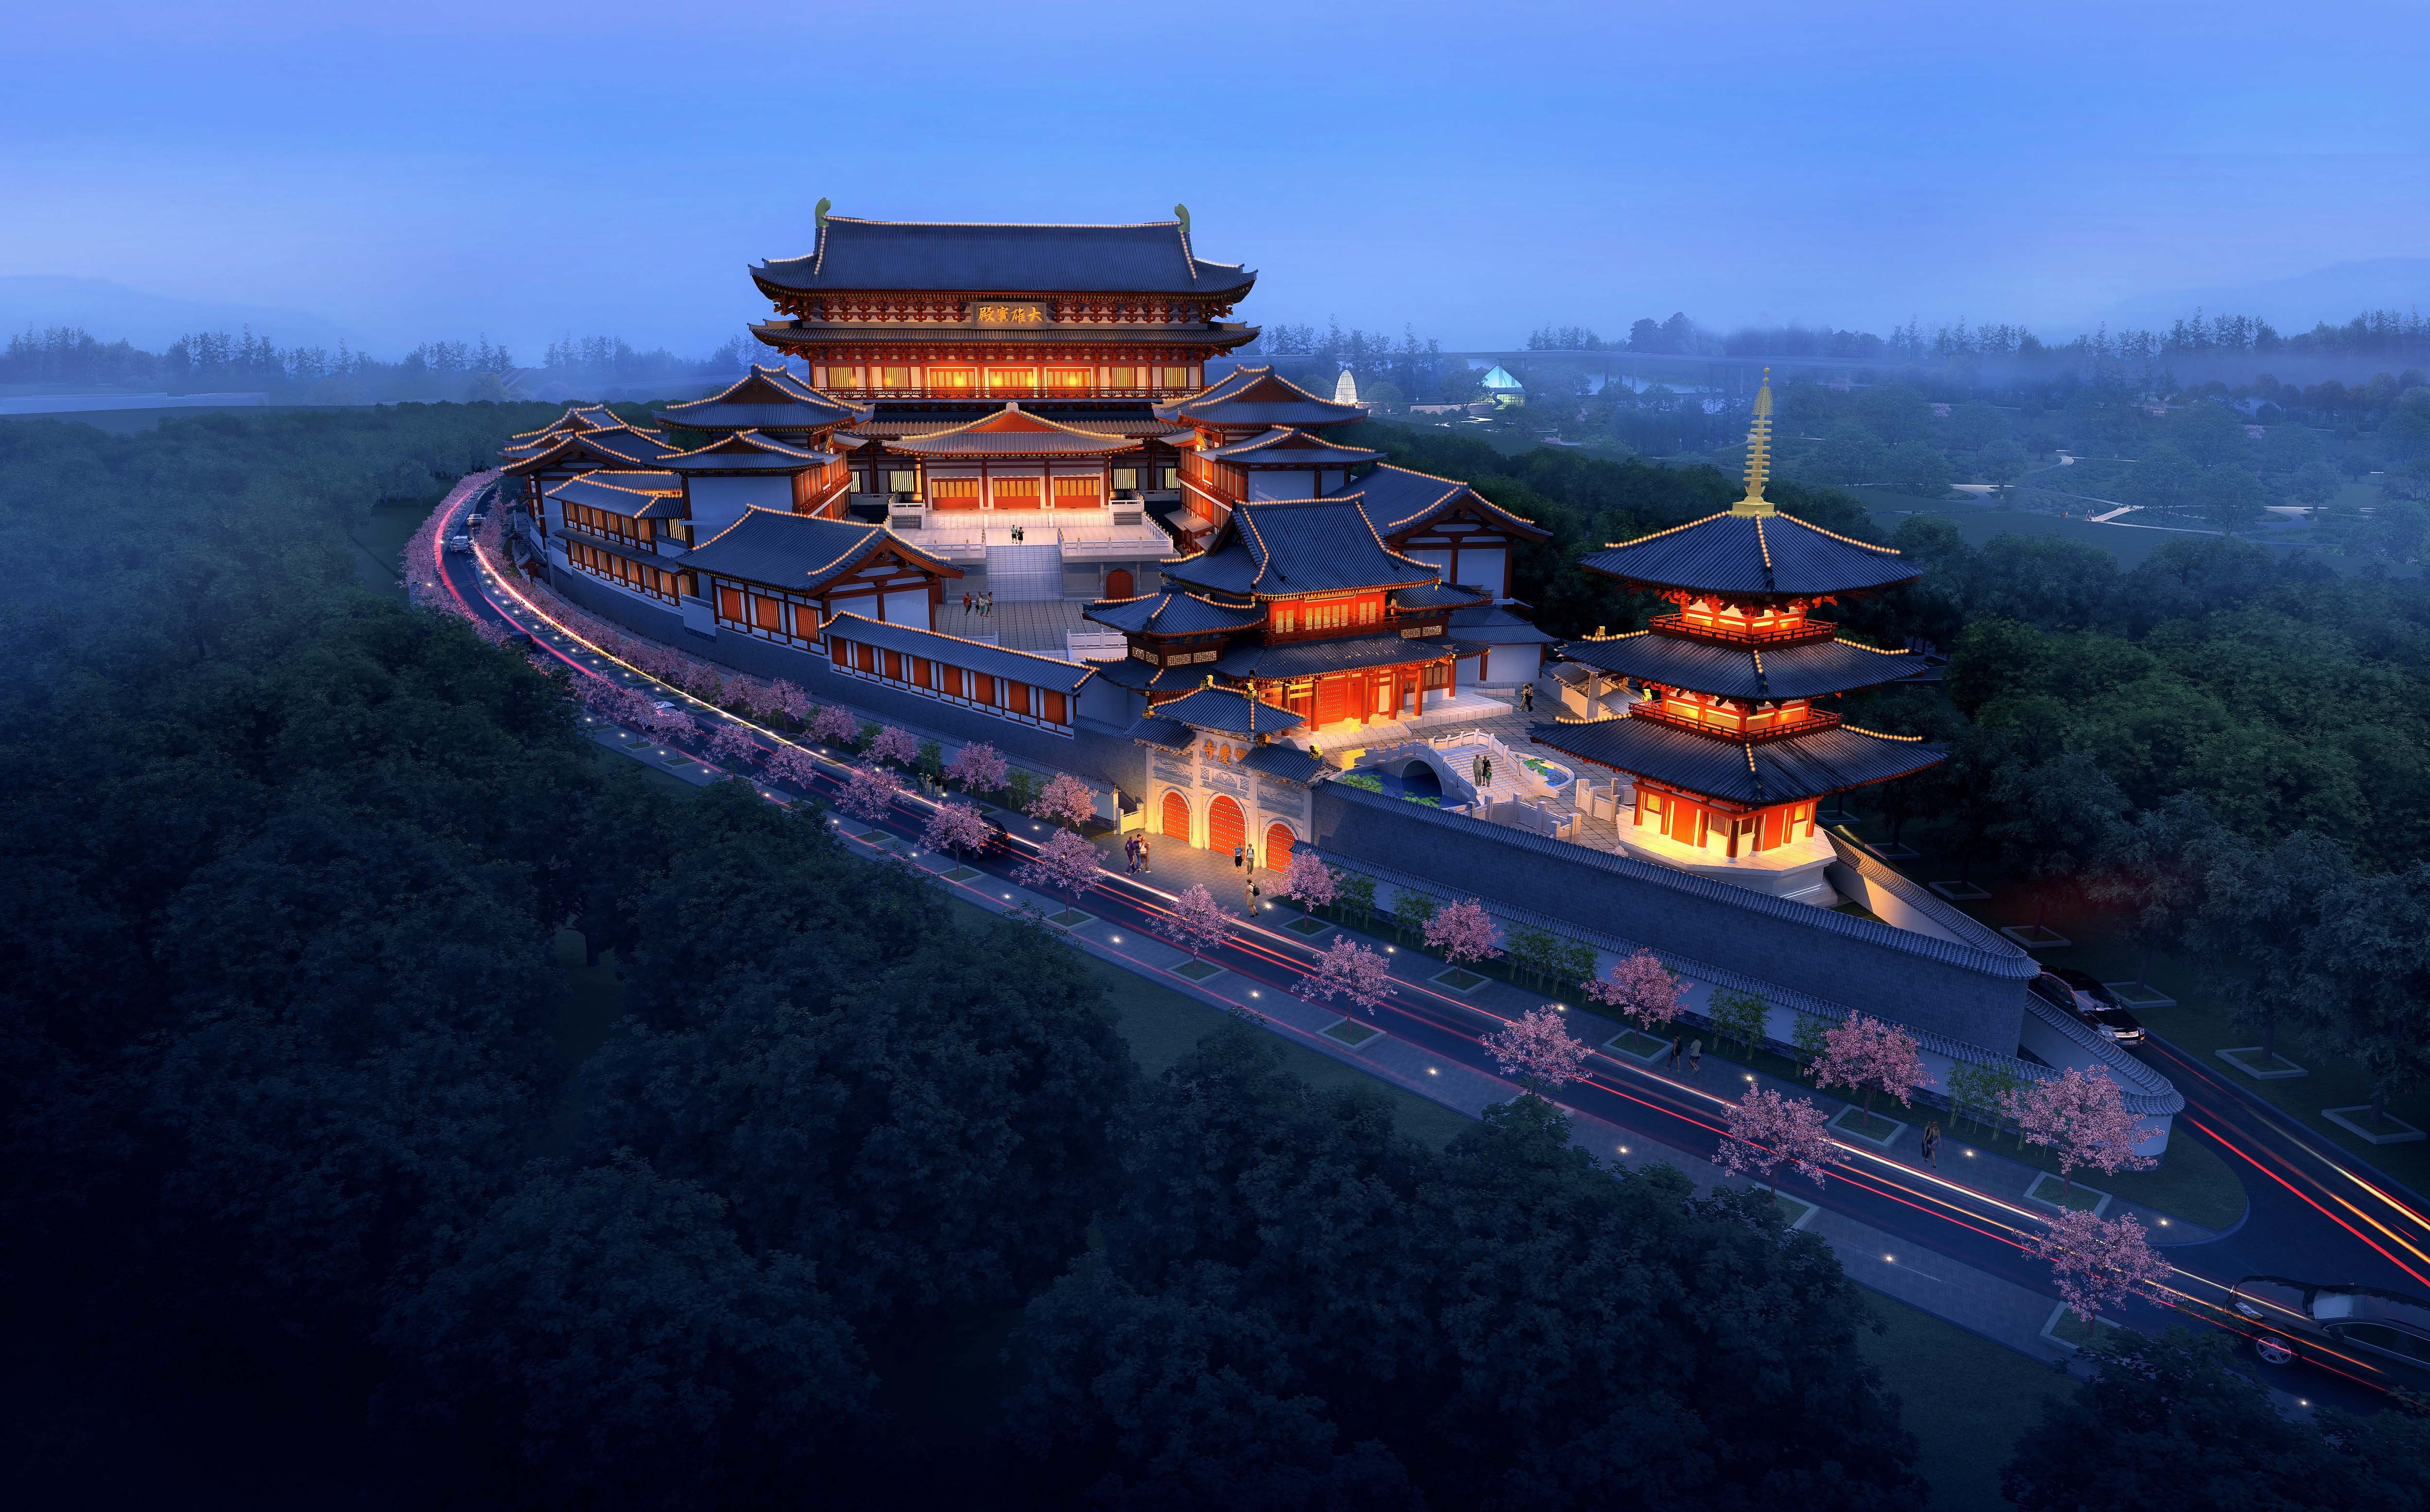 ＂Three treasures of Dharma boat, the boat of Buddha＂ -- Architectural Design of Baoqing Temple won 2